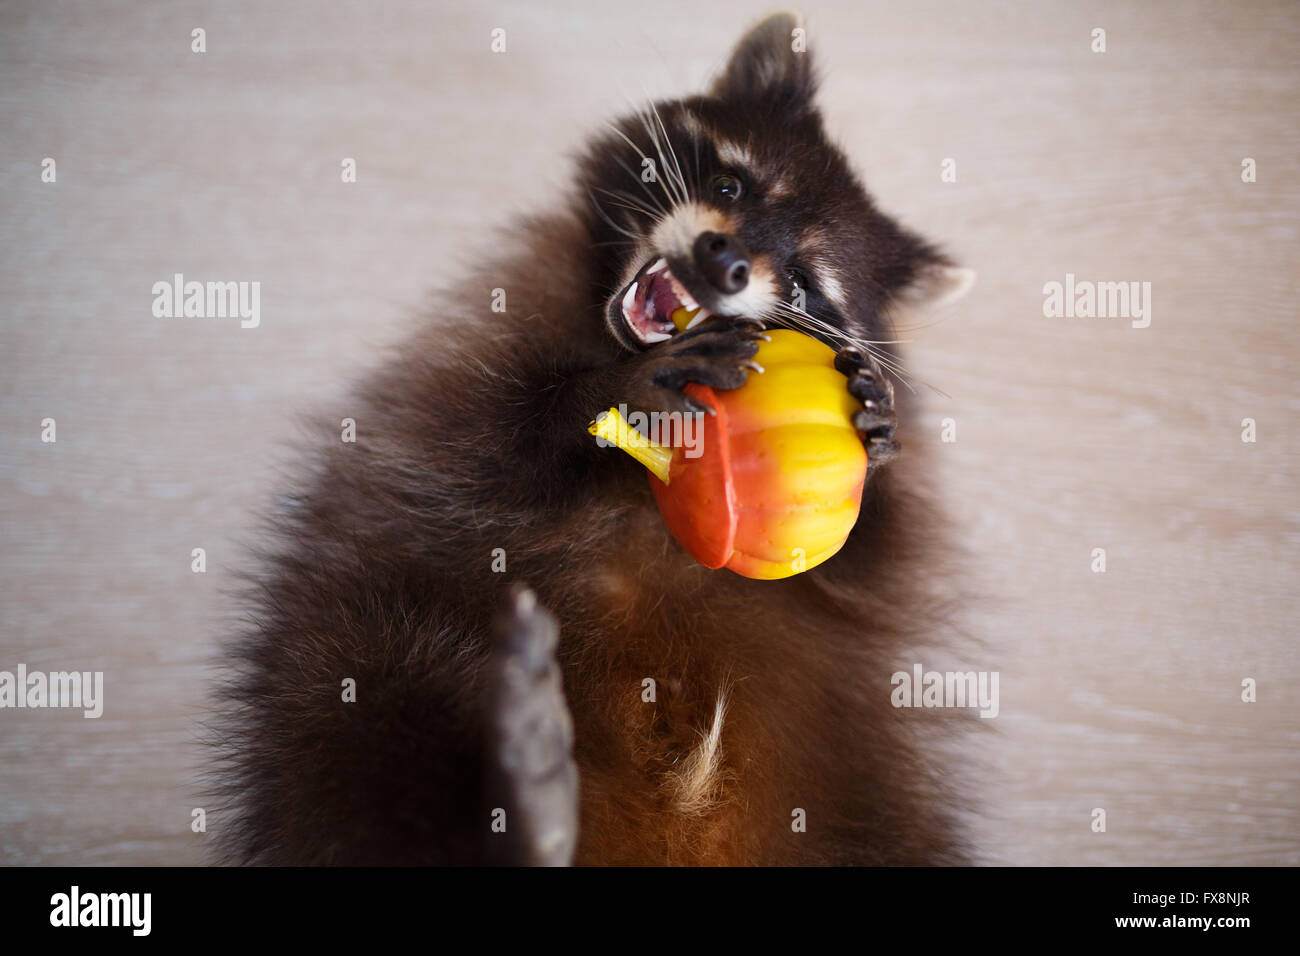 Close-up portrait of raccoon with toy on a grey background Stock Photo